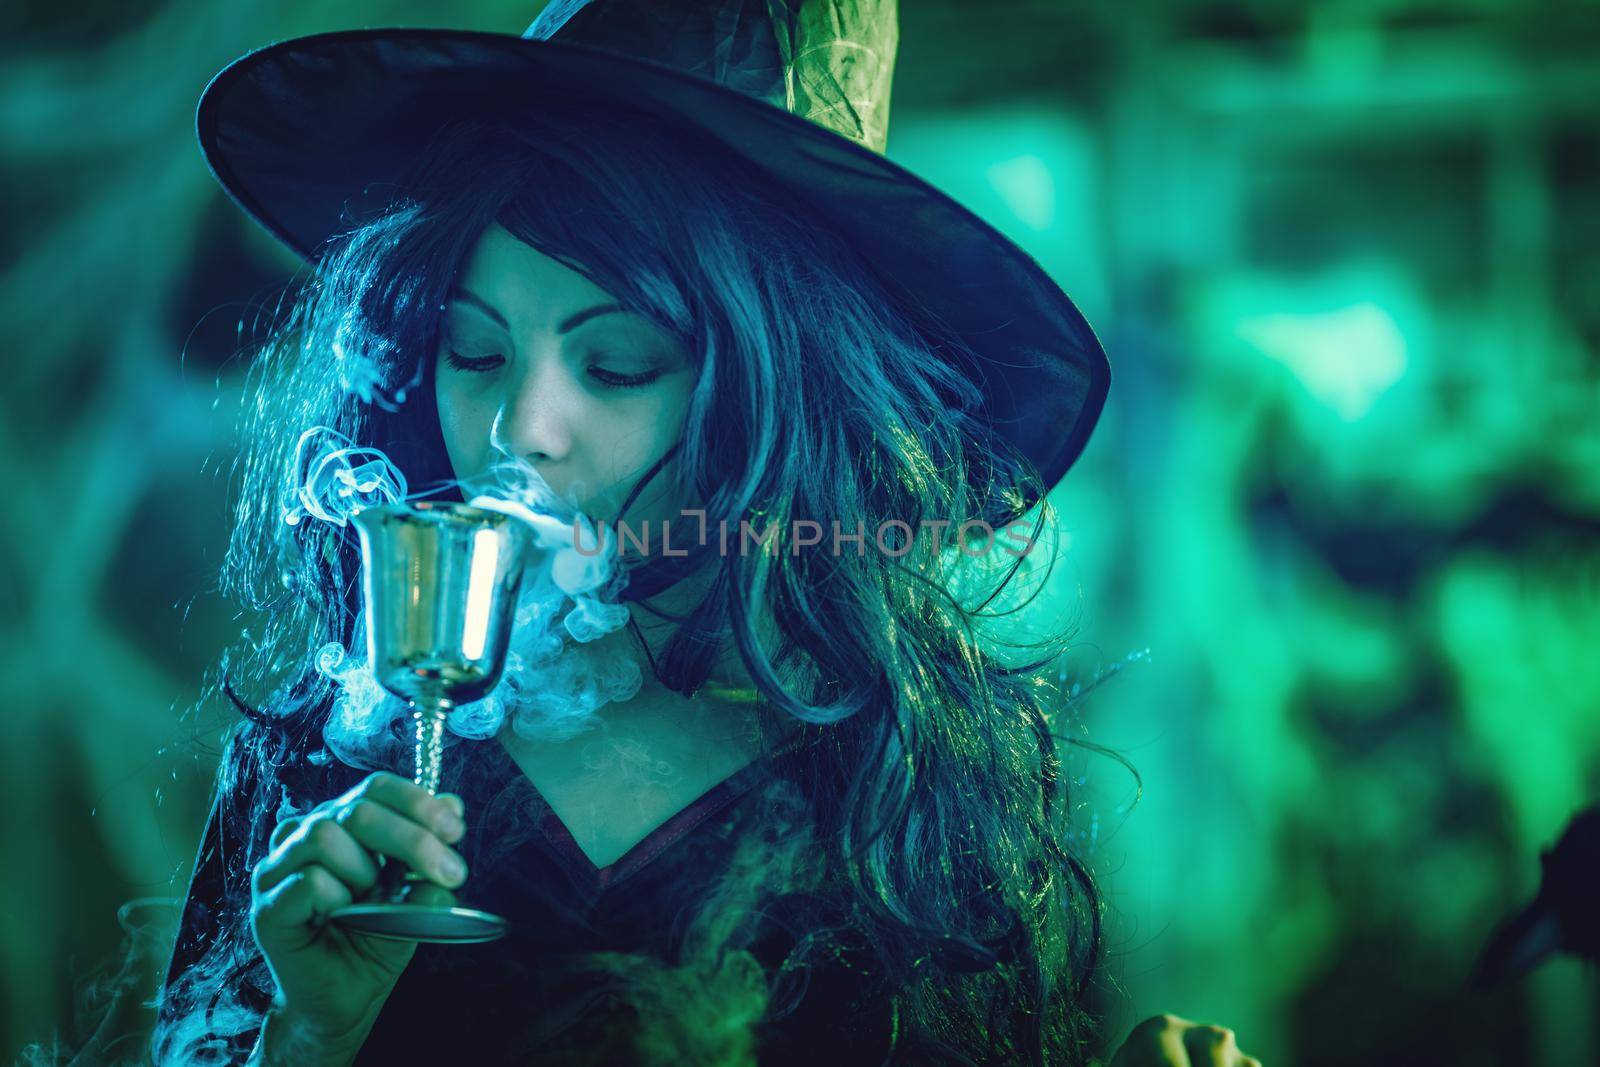 Young witch with serious face holding a goblet and drinks a magic potion in creepy surroundings and smoky green background.